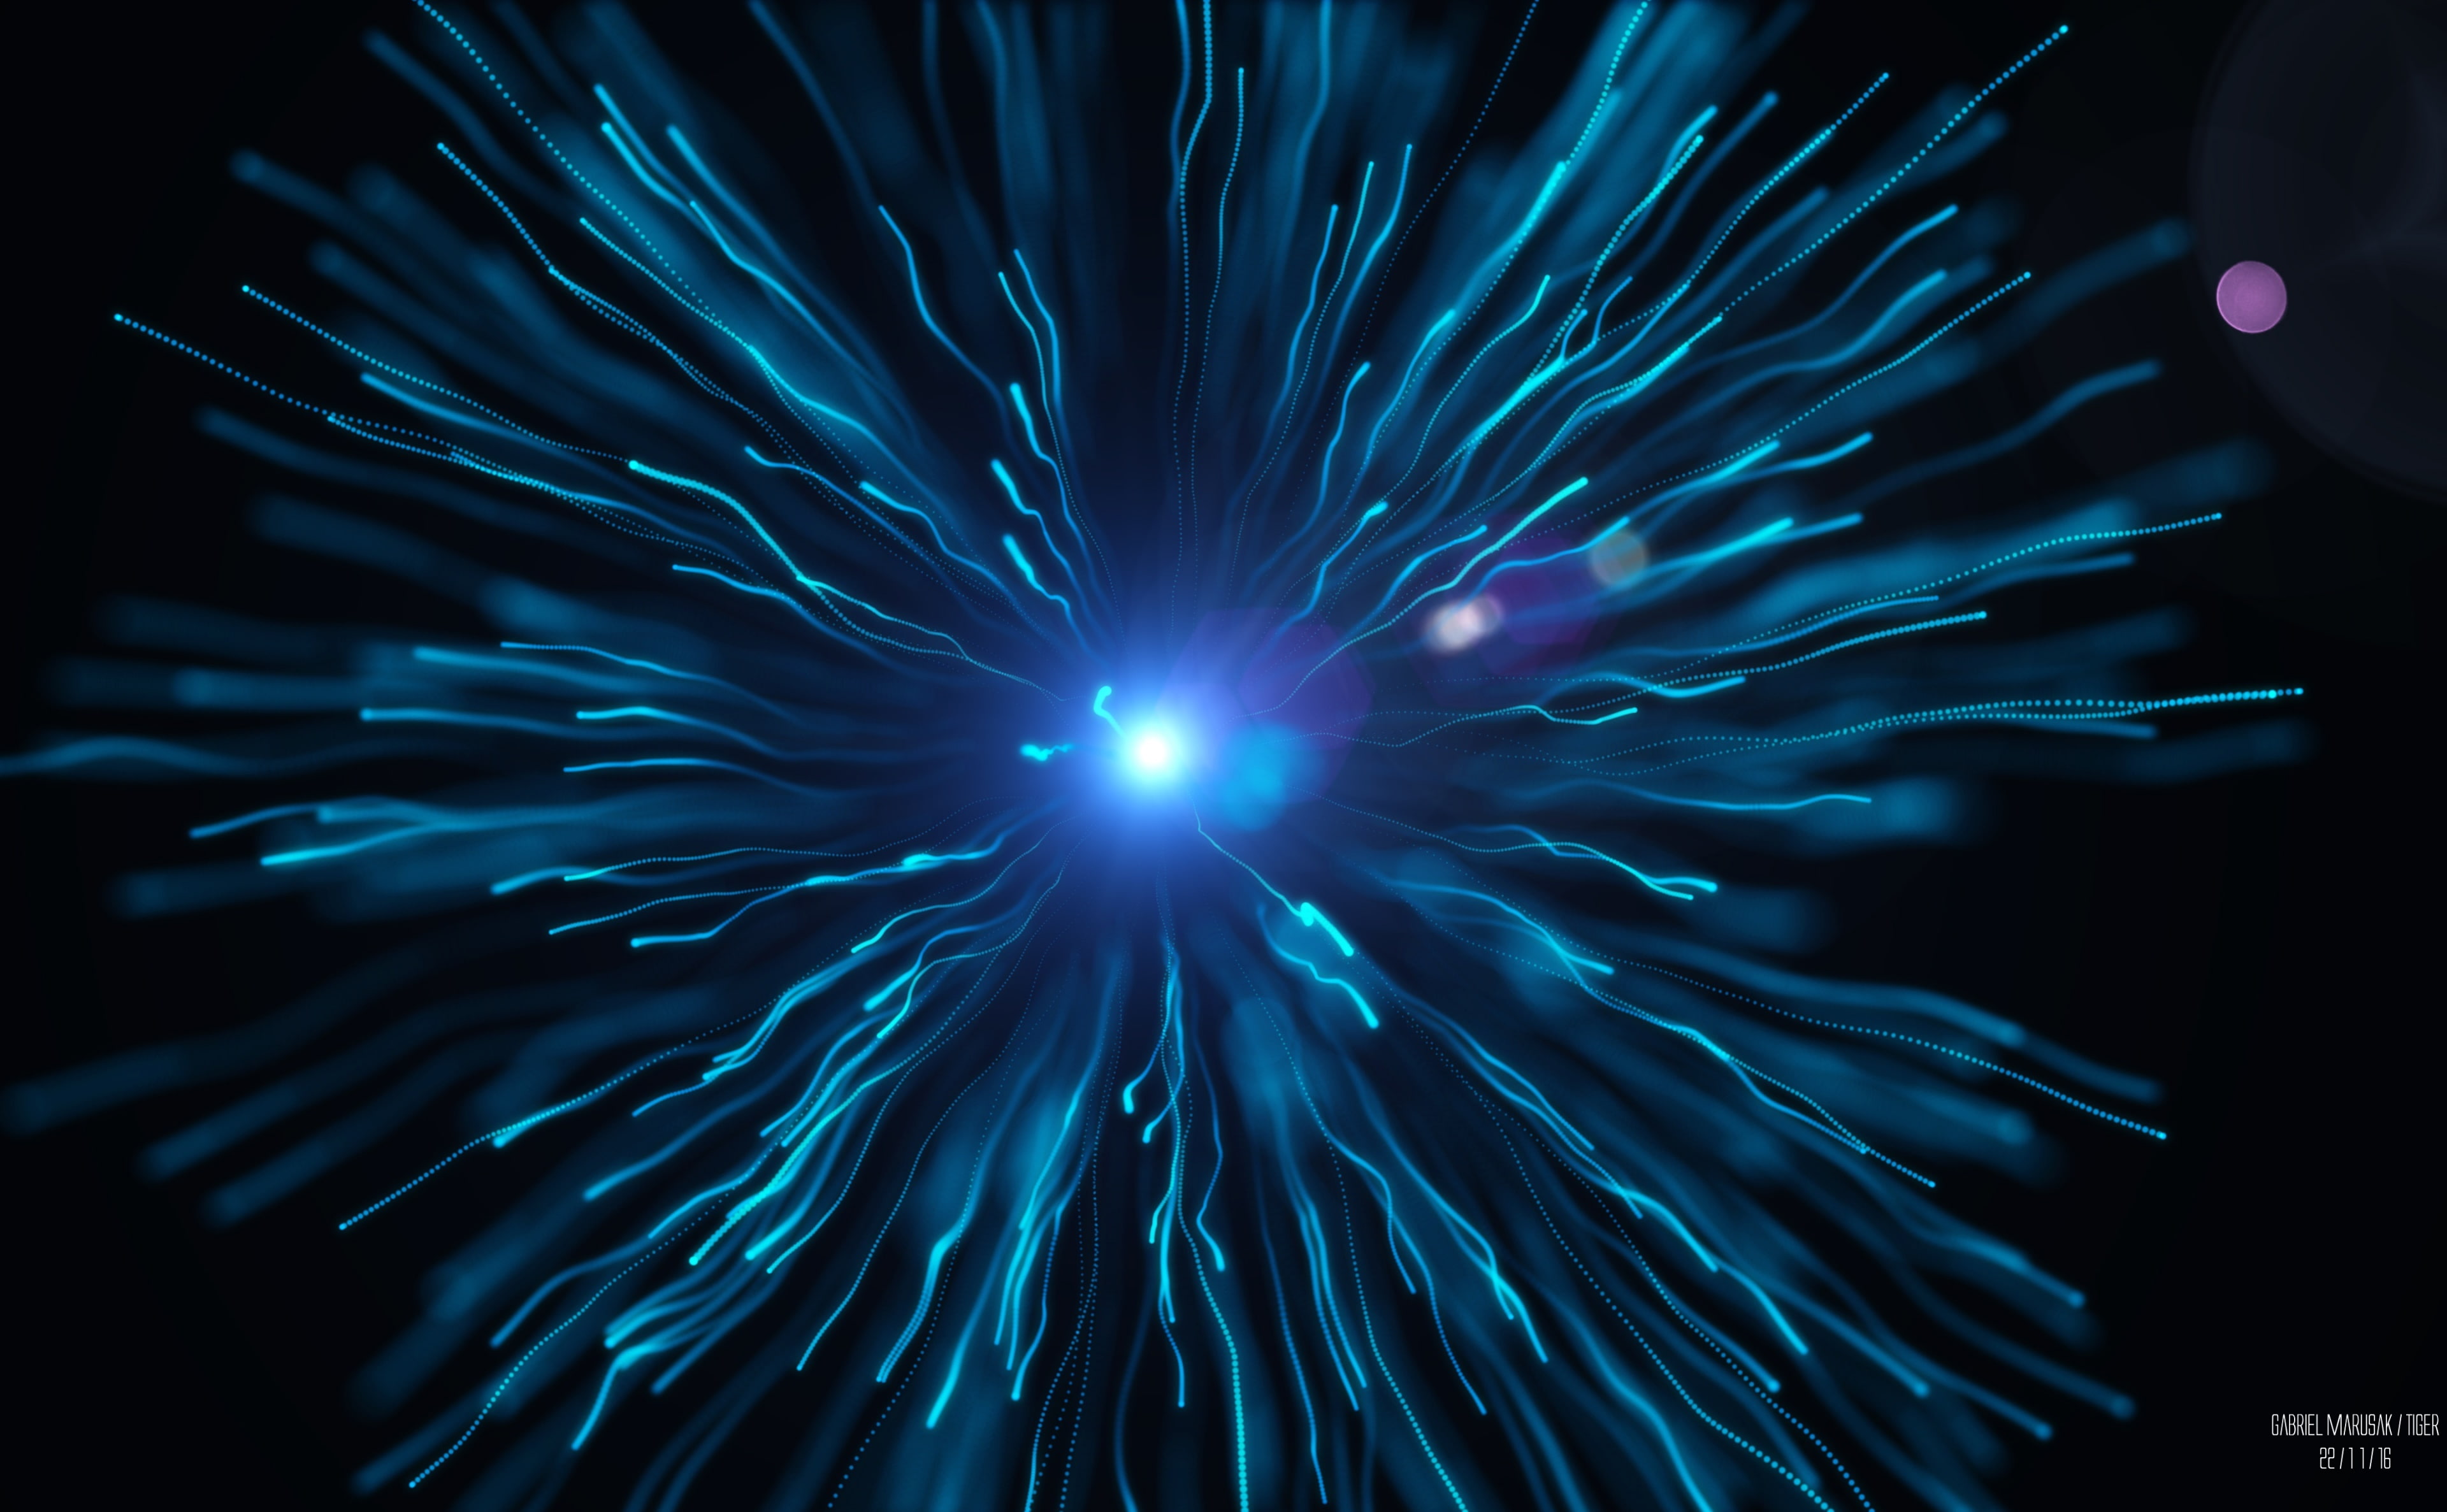 Particles 4K, blue graphics screenshot, Artistic, Abstract, exposion